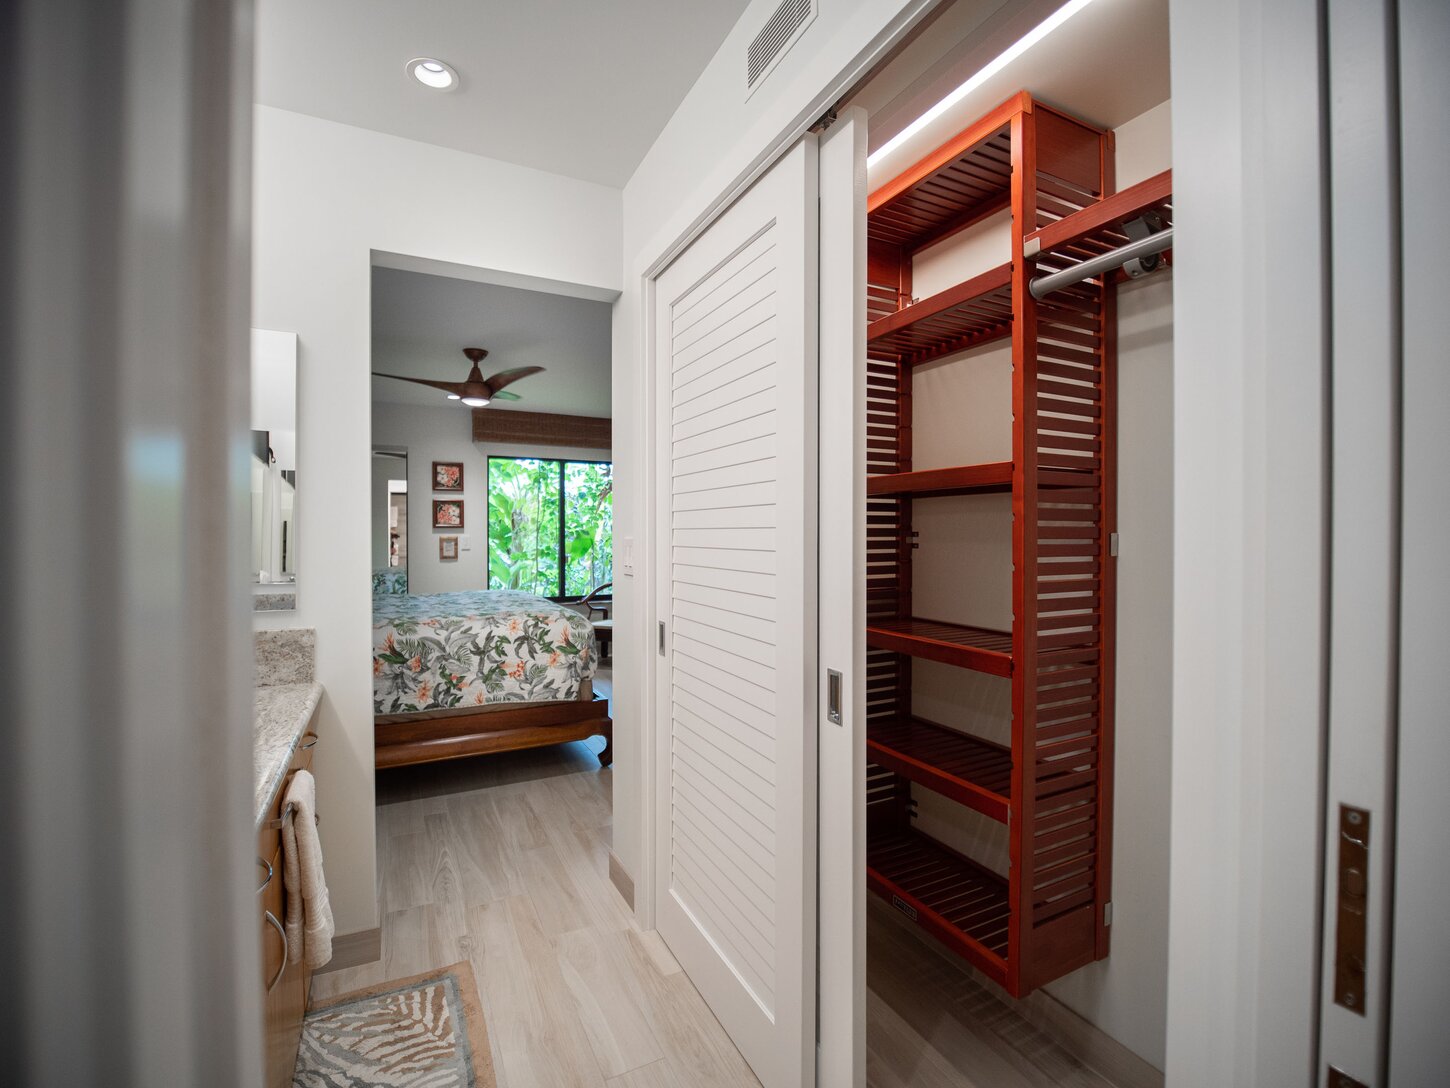 Master bathroom vanity area features ample storage and closet space